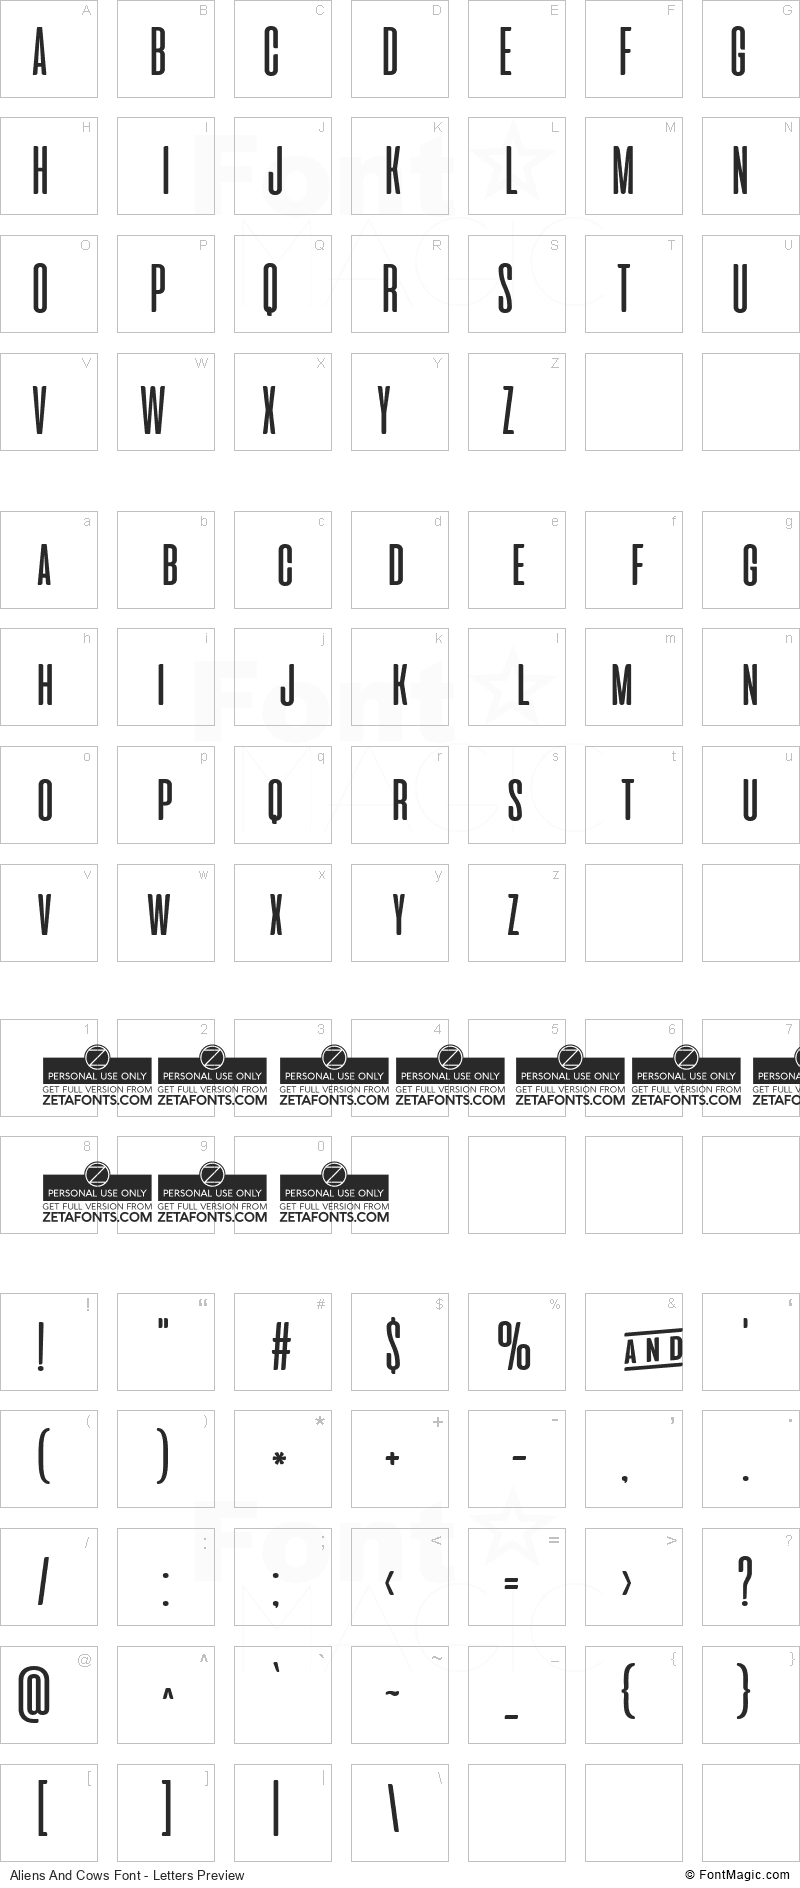 Aliens And Cows Font - All Latters Preview Chart